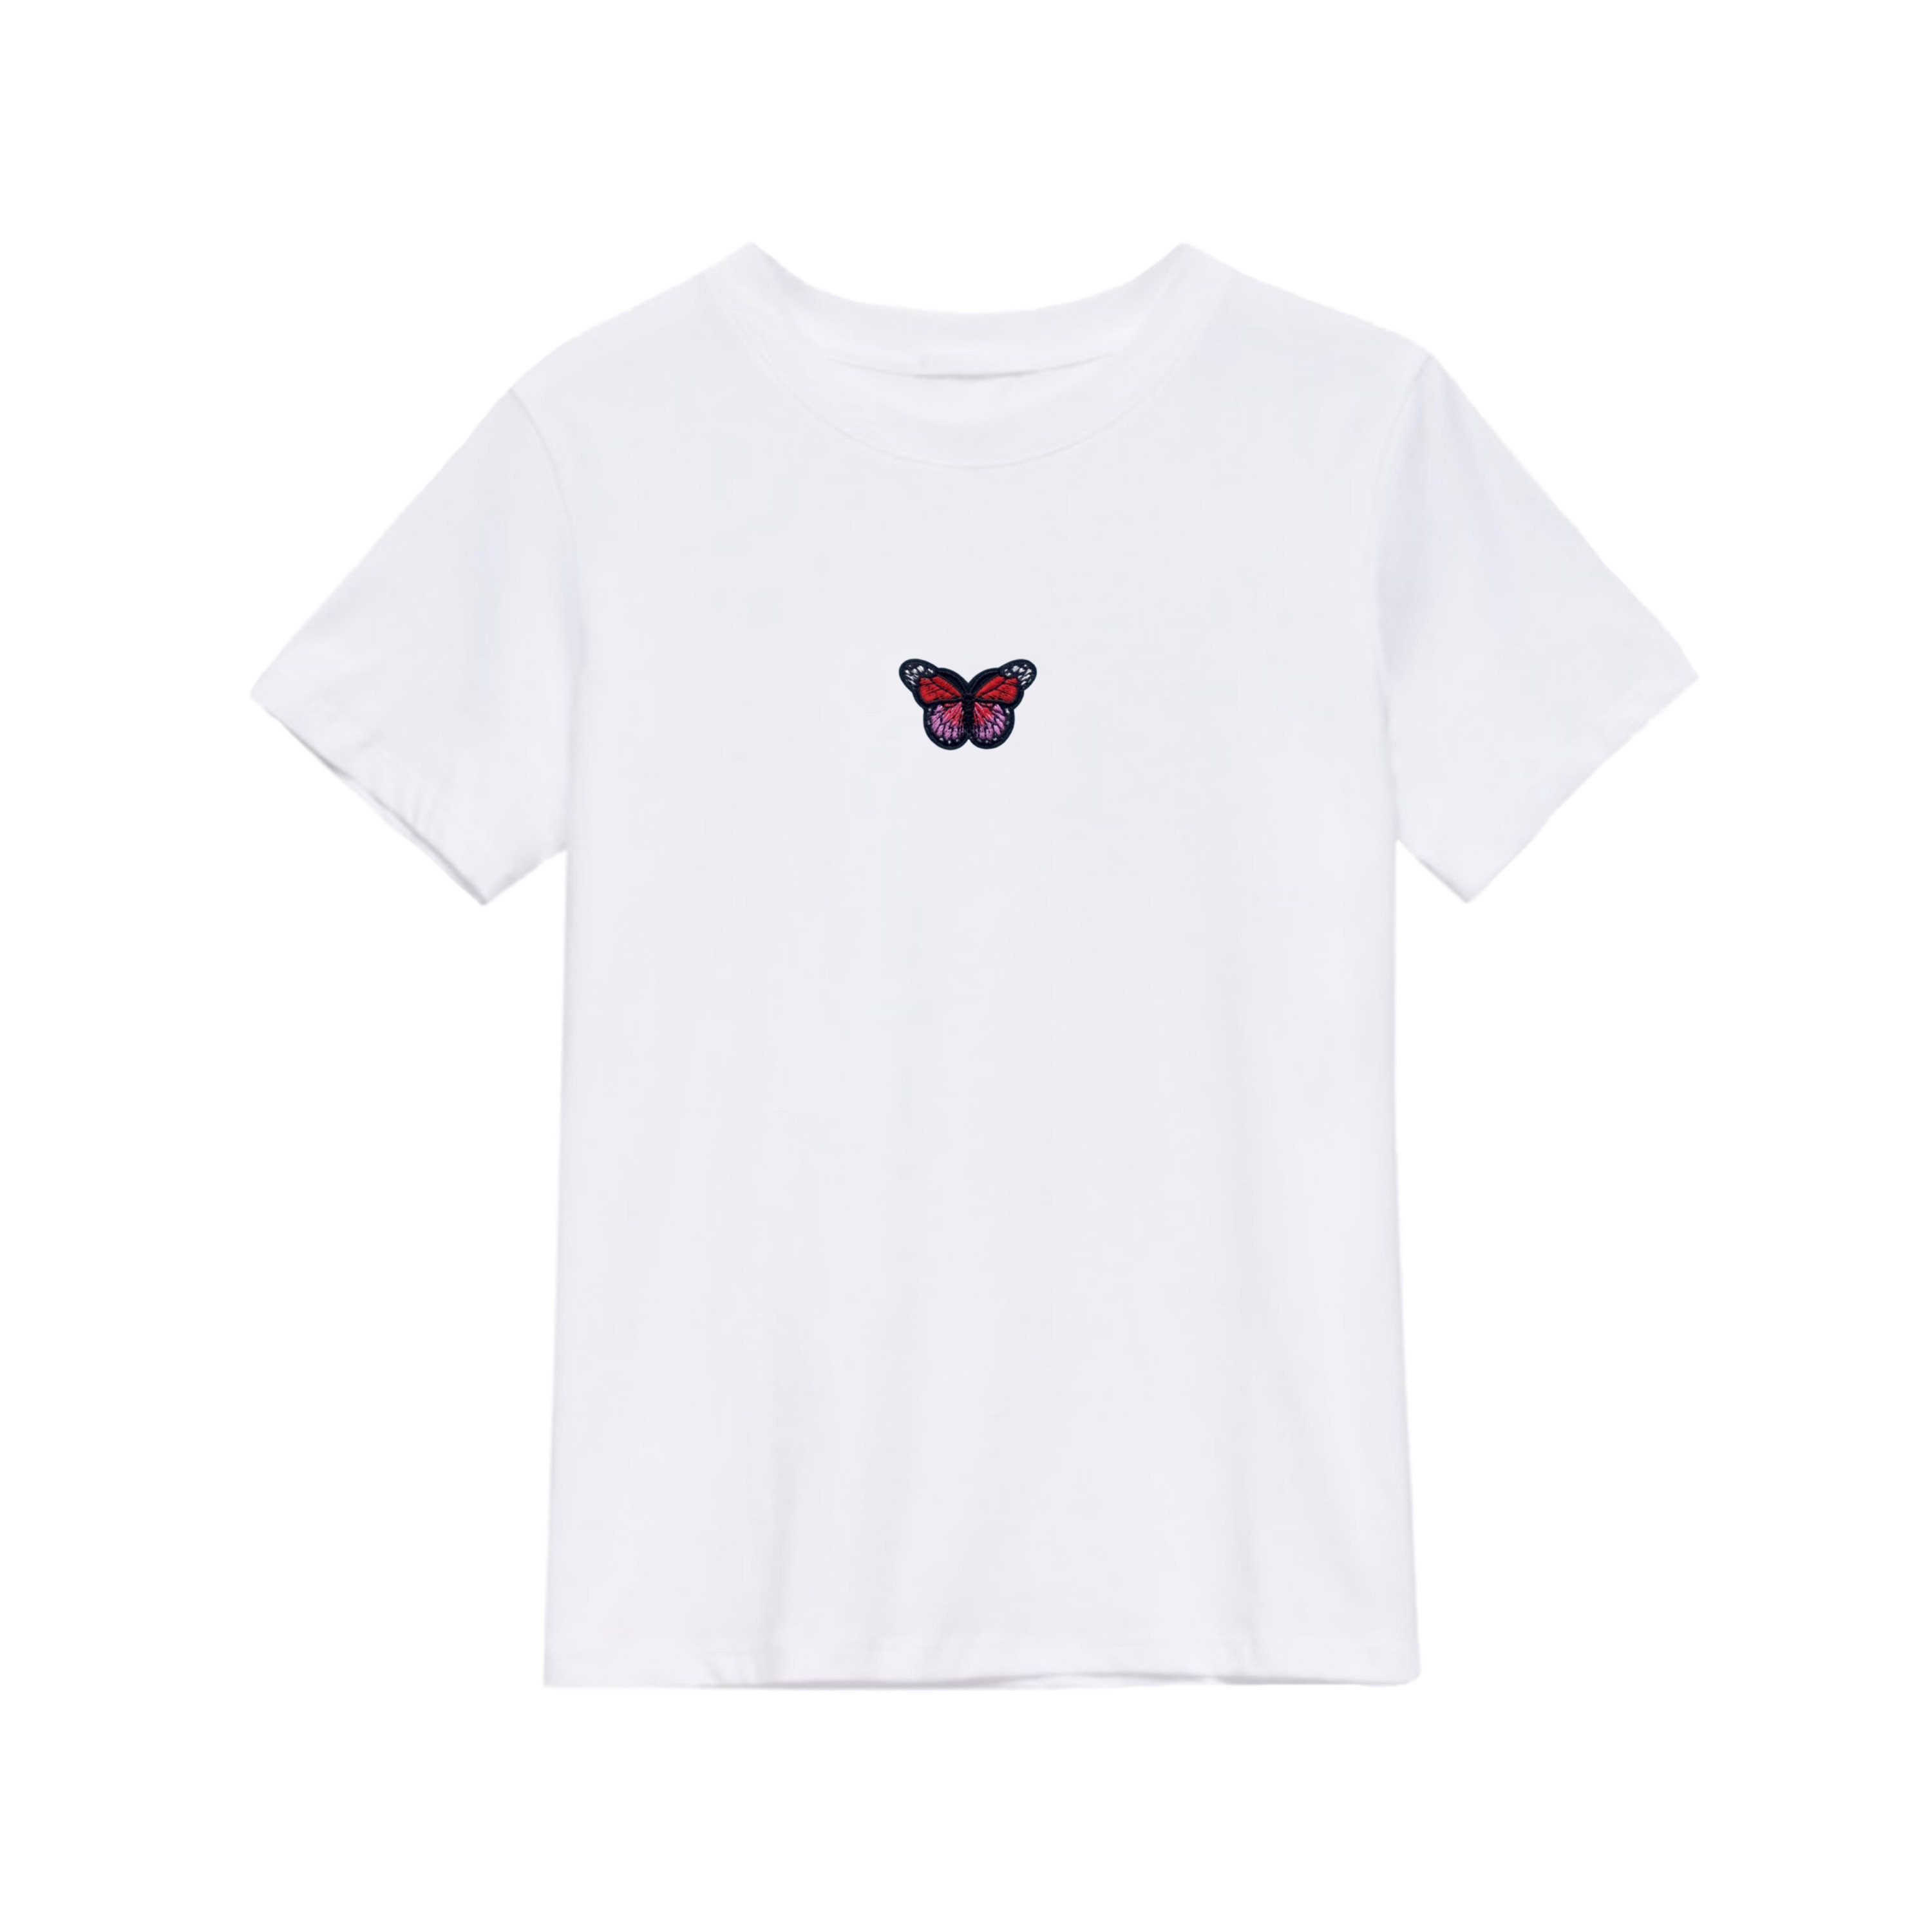 Red butterfly tee | Etsy